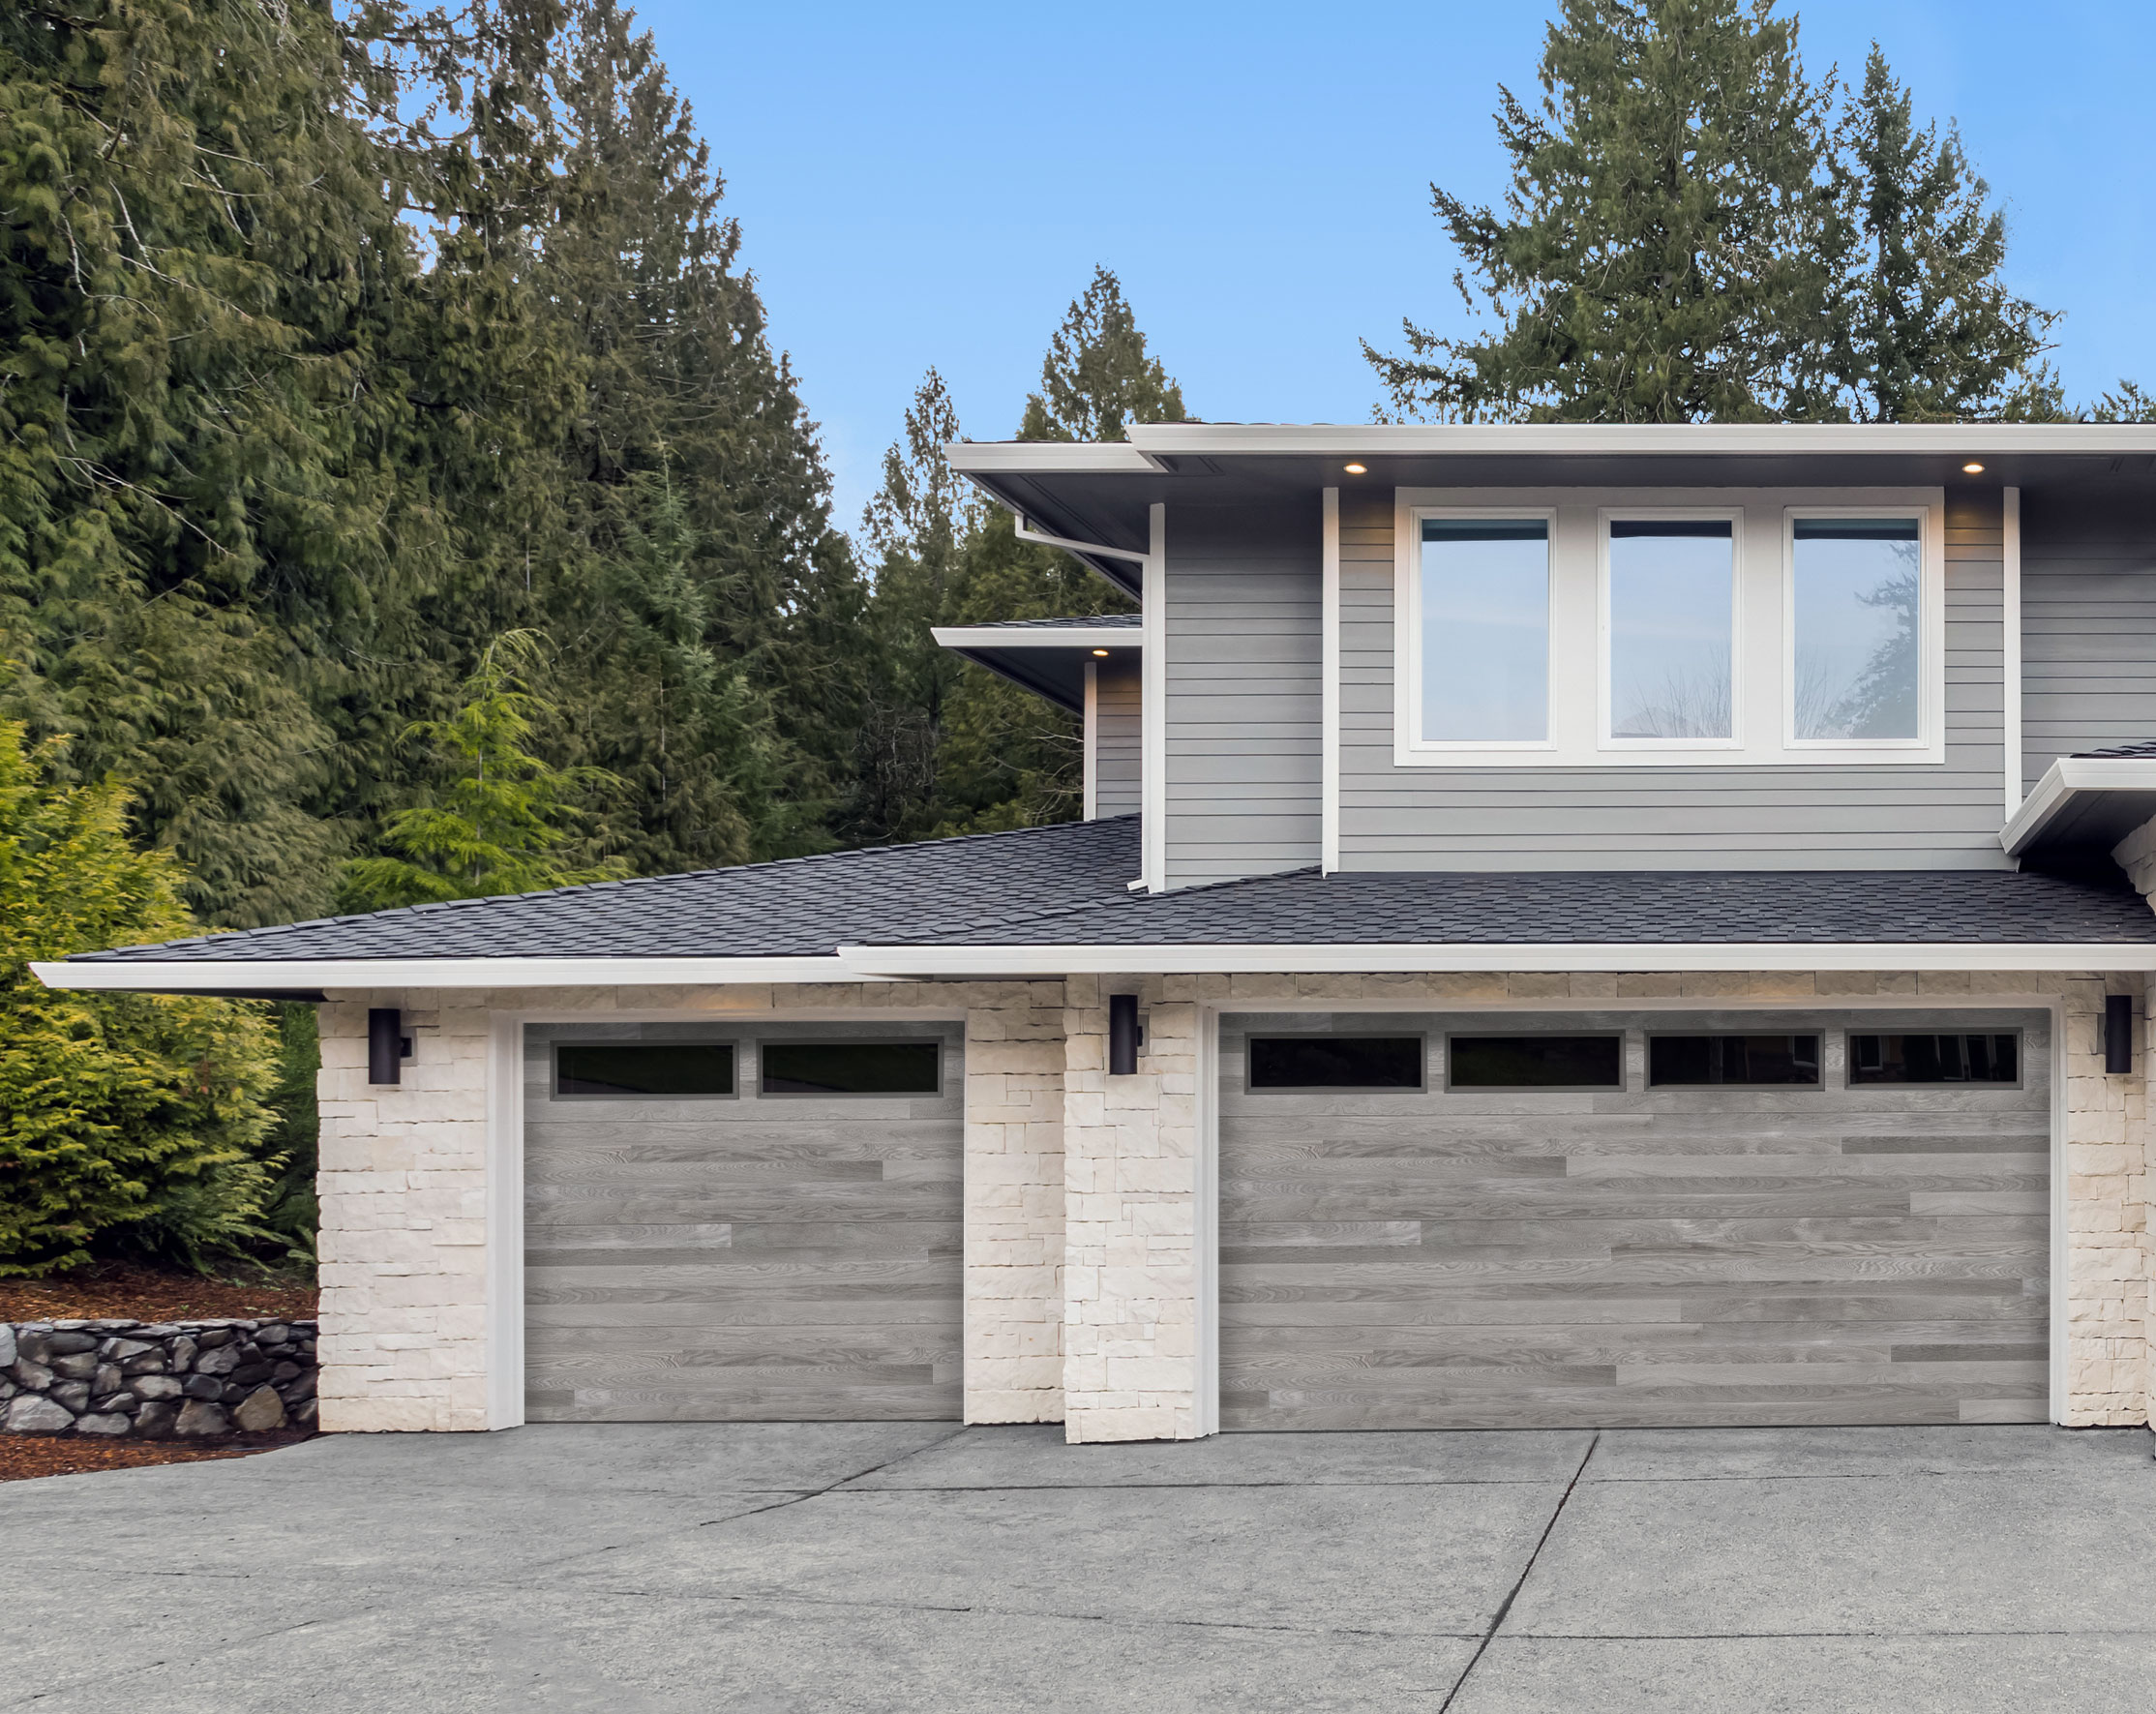 Steel gray single and double garage door with H-plank design and glazed windows